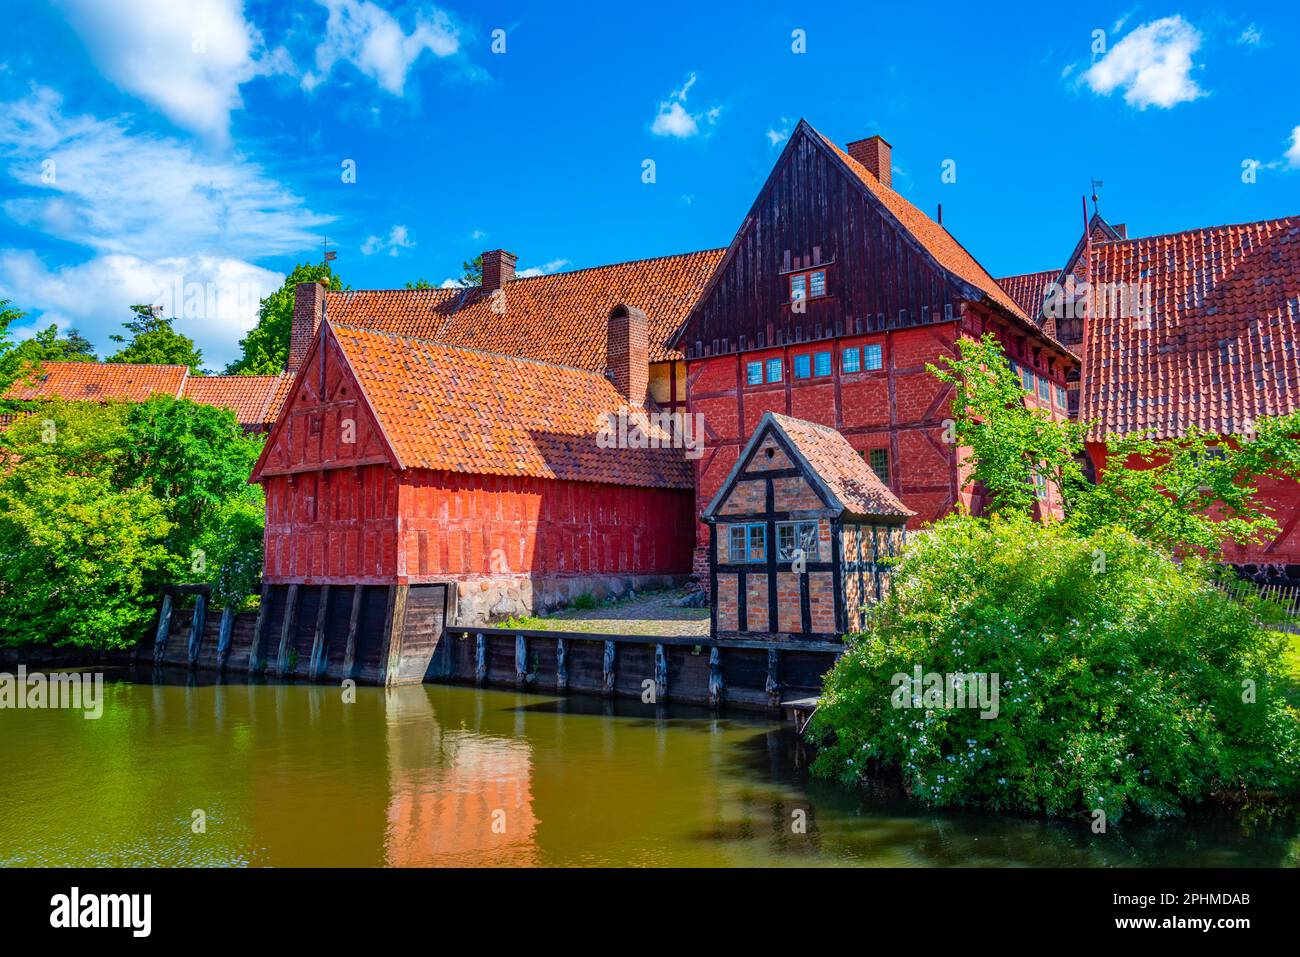 Colorful houses in Den Gamle By open-air museum in Aarhus, Denmark. Stock Photo